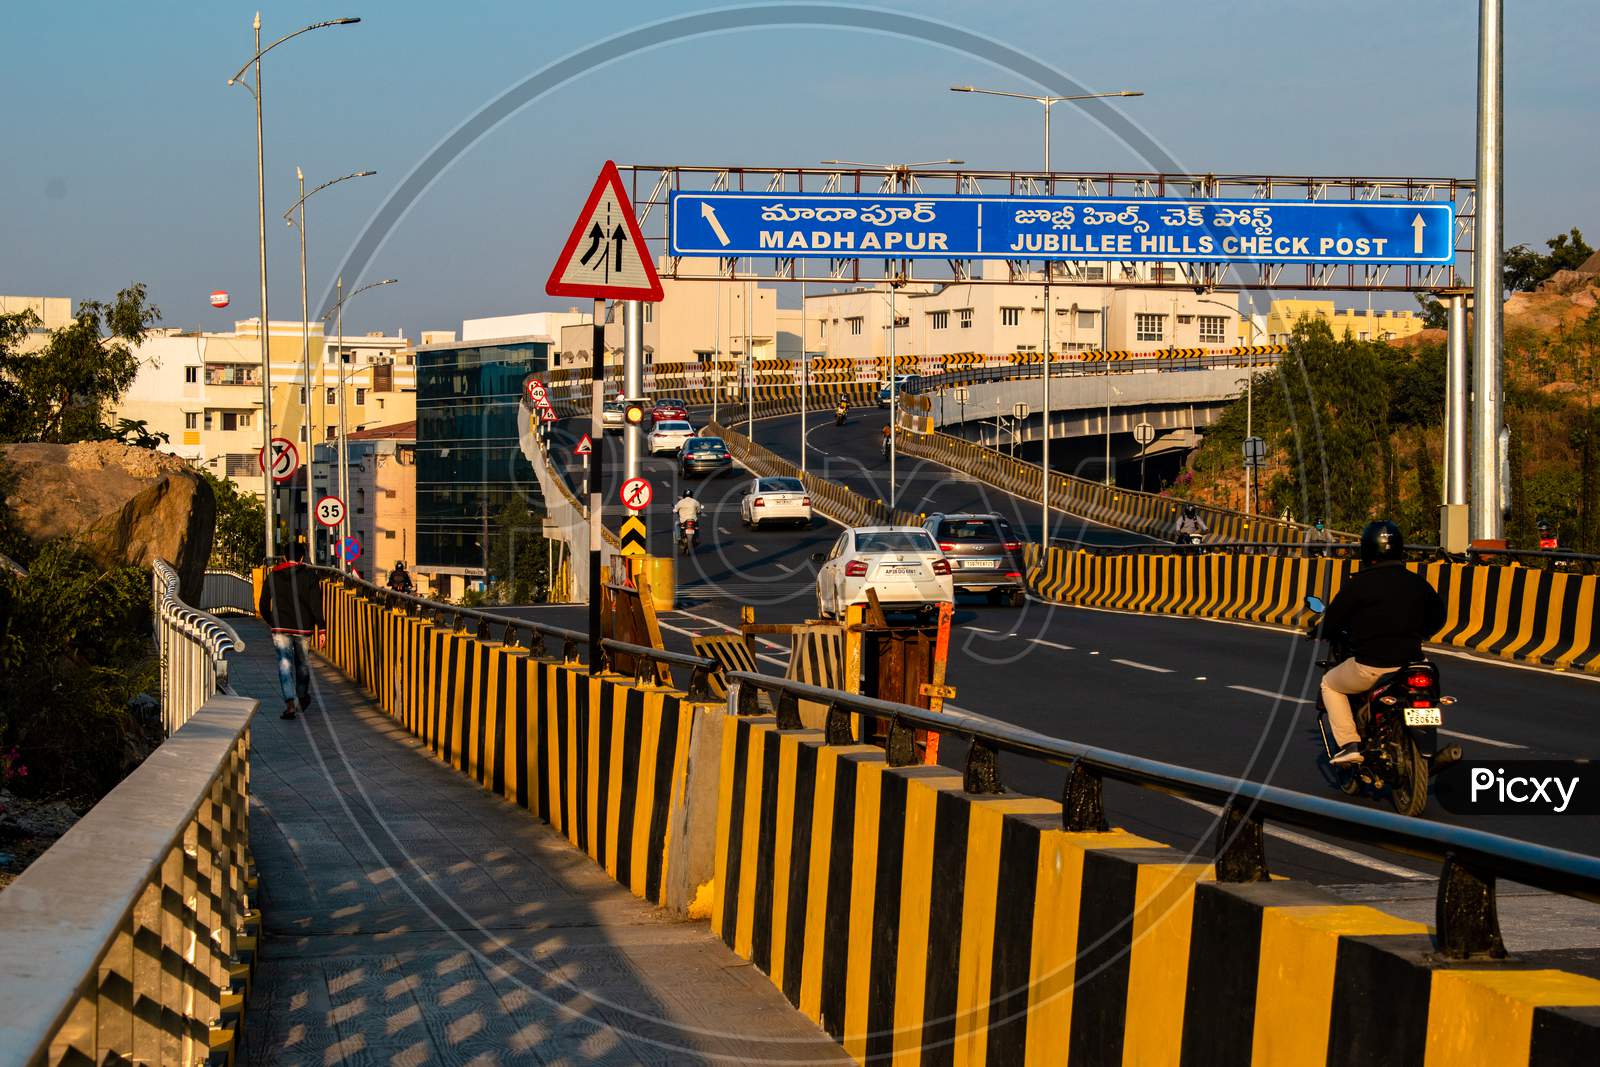 FLYOVER CONNECTING TO JUBILEE HILLS RD.NO45 FROM DURGAM CHERUVU CABLE STAYED BRIDGE, MADHAPUR, TELANGANA.